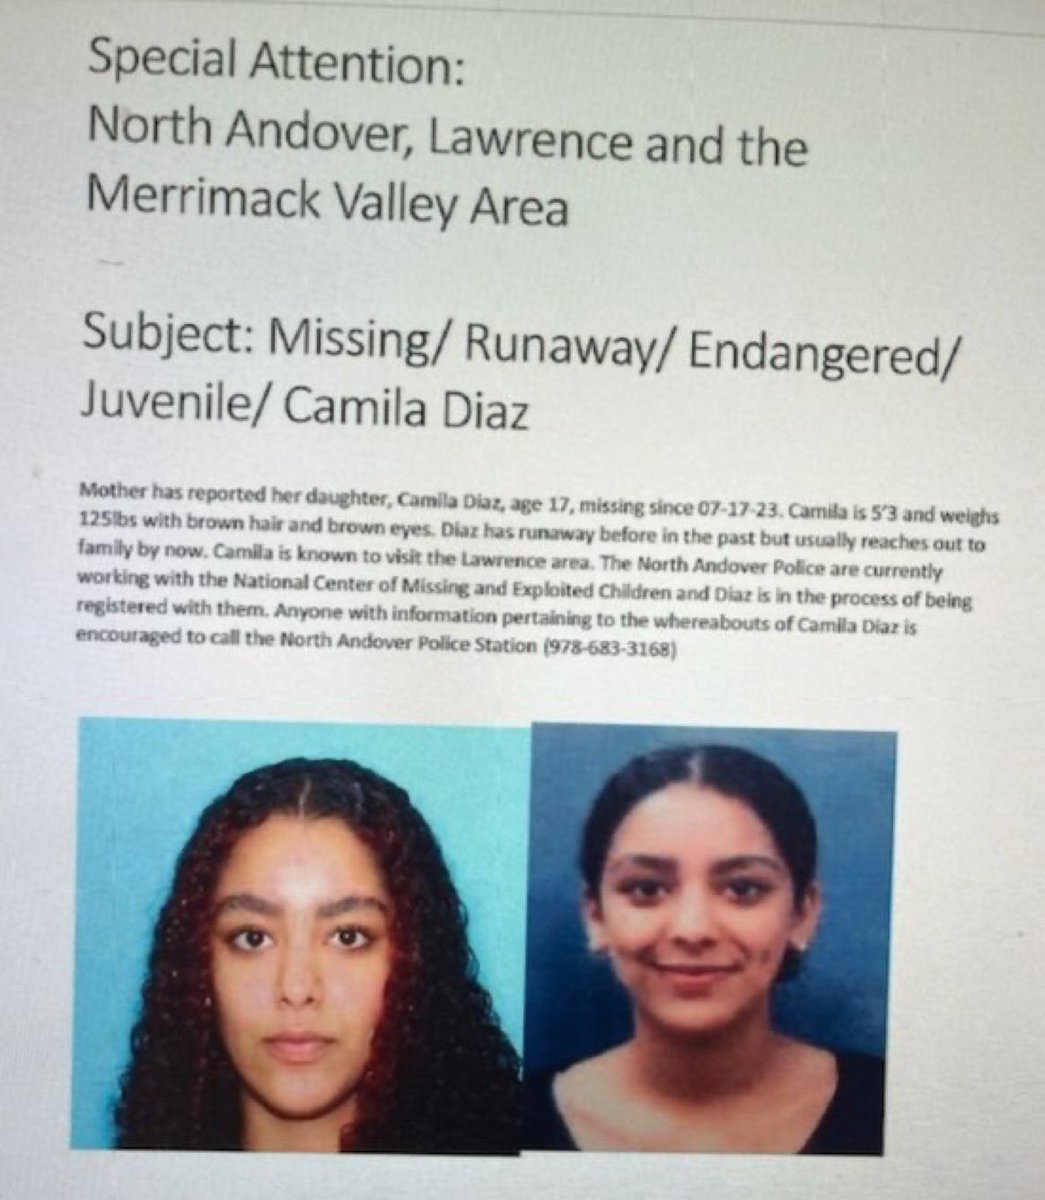 #missing #Lawrencema #northandover